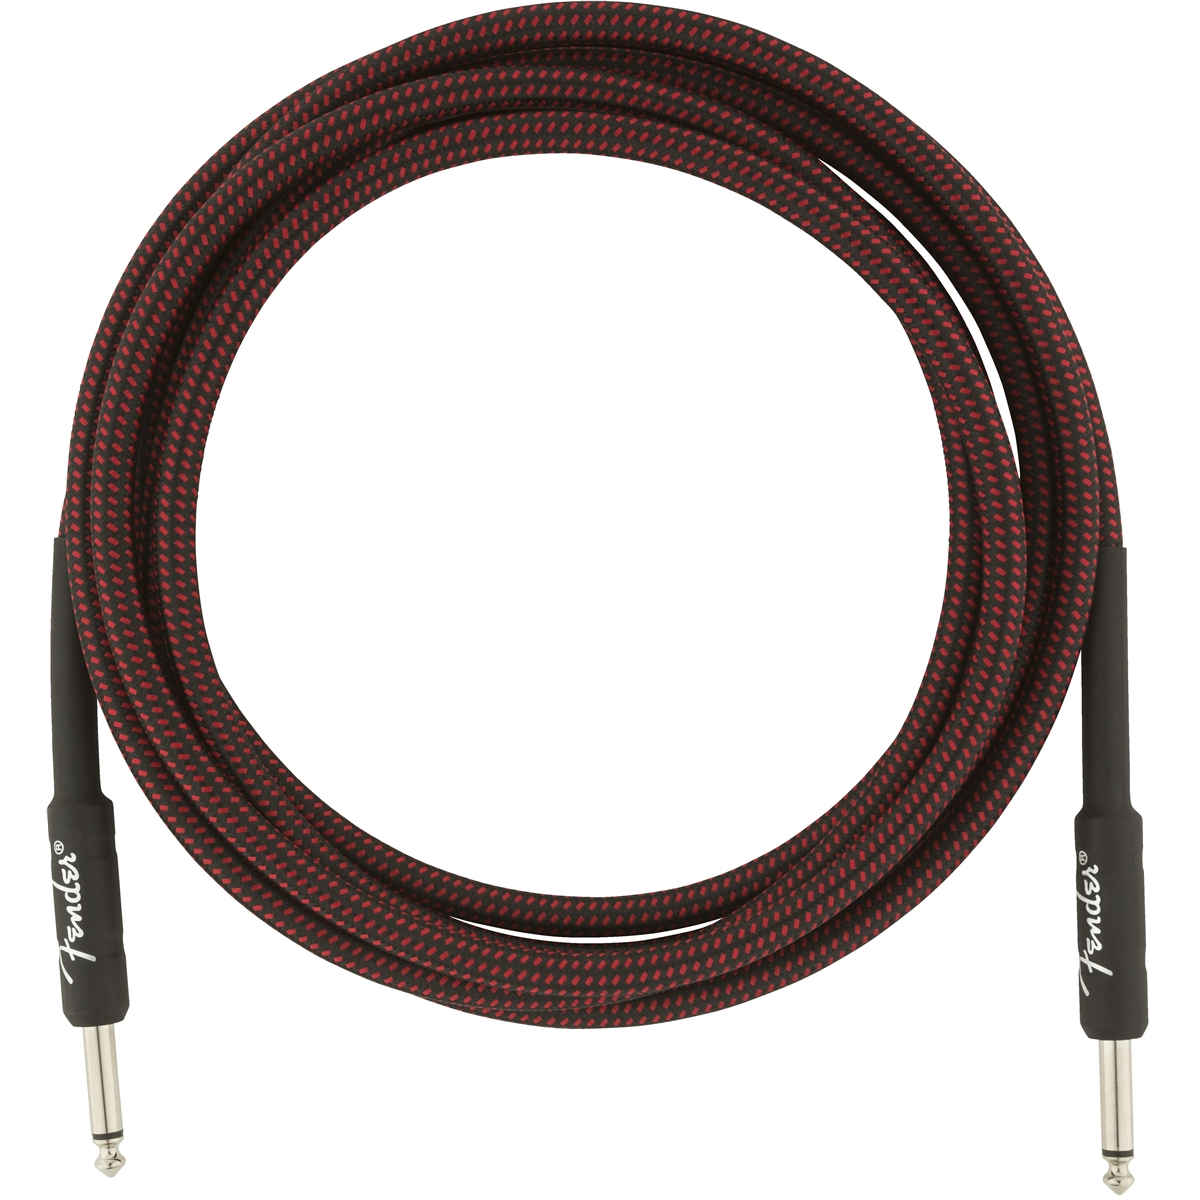 Fender Professional Series Instrument Cable 10 FT, Red Tweed